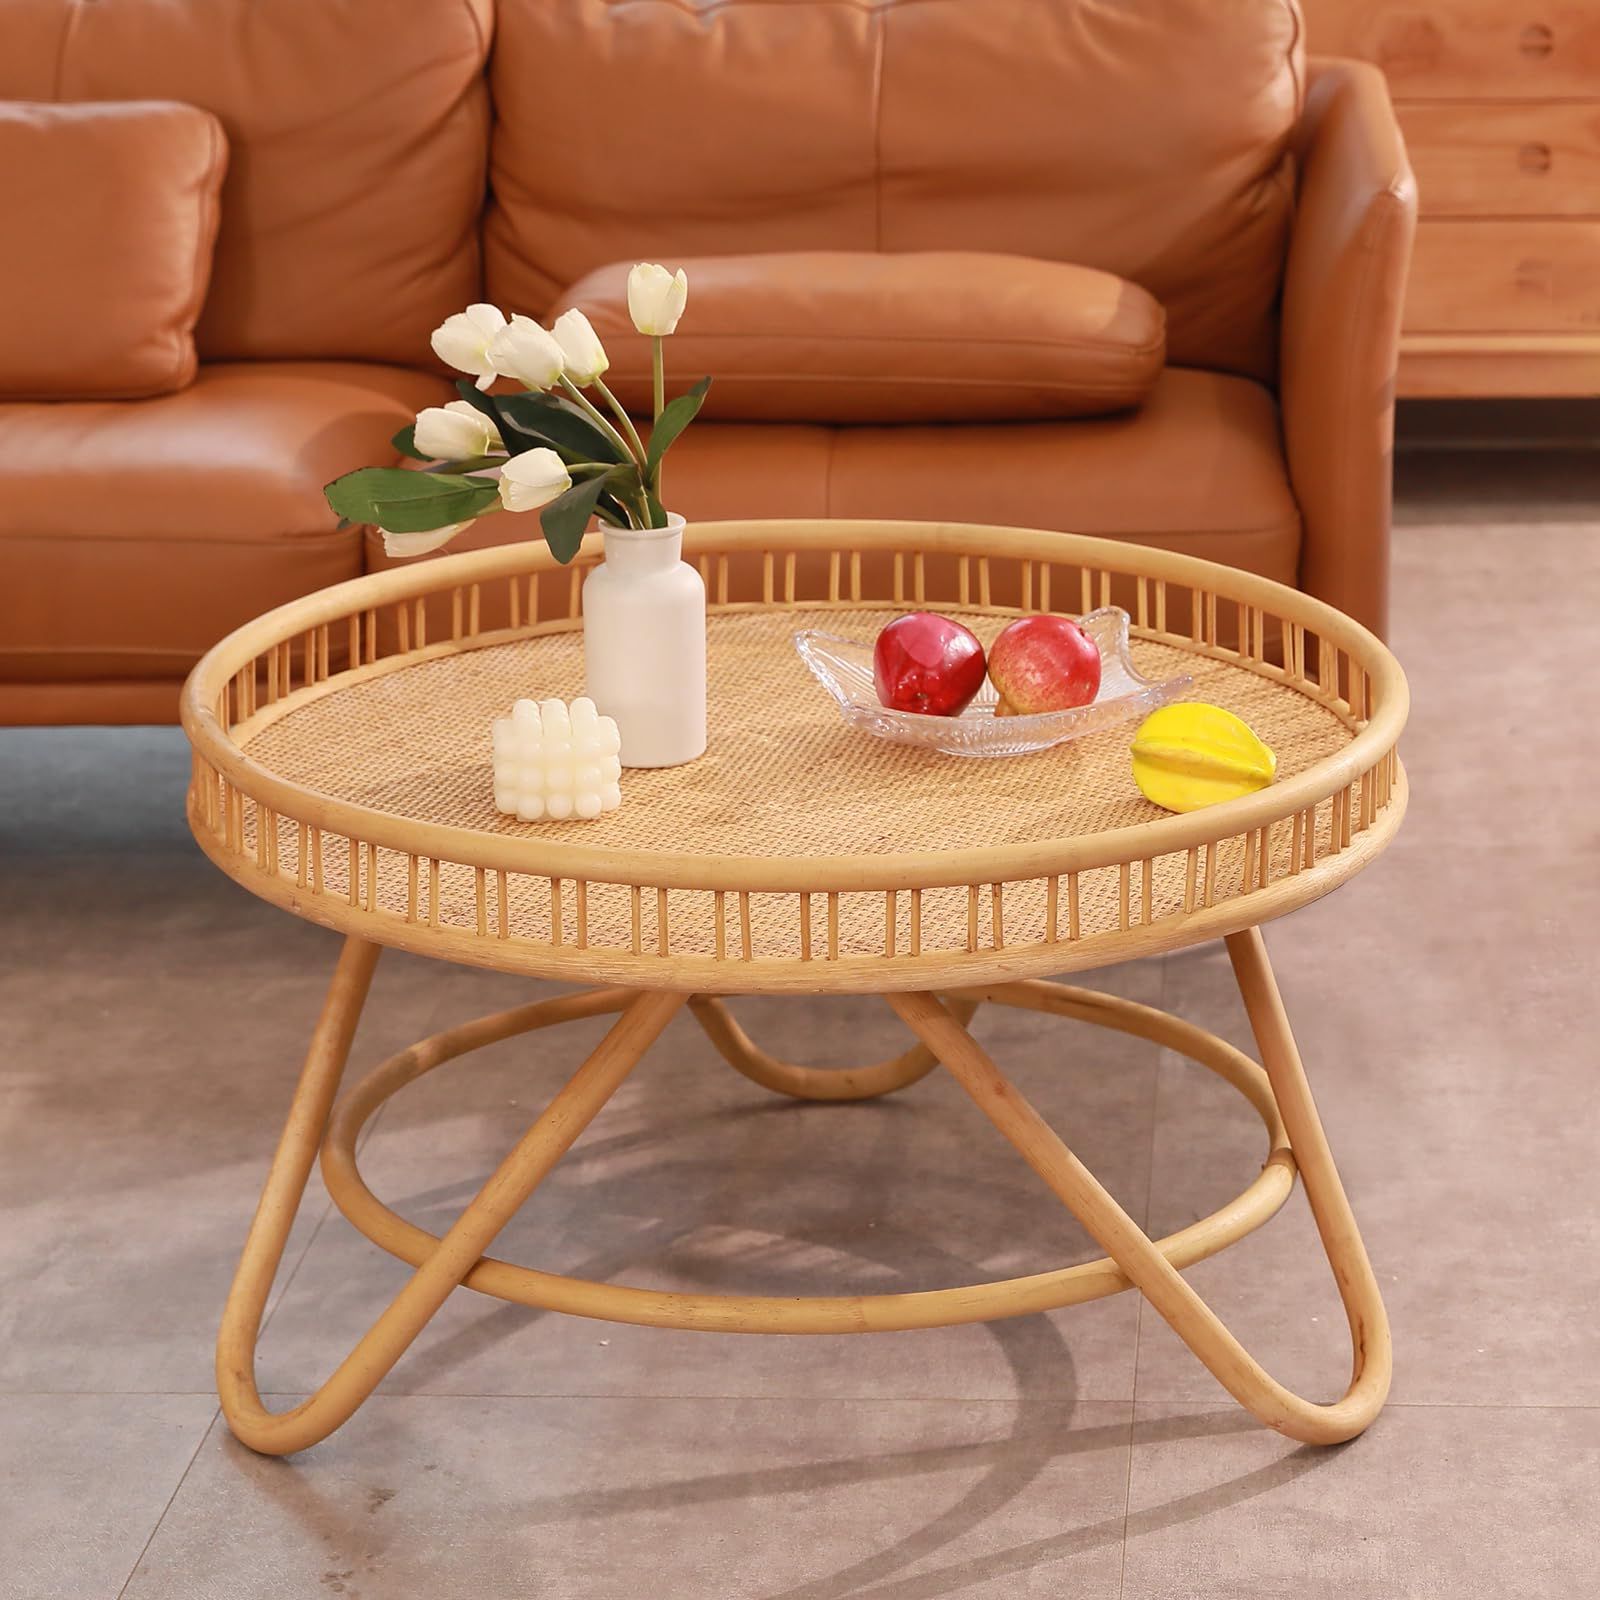 Rattan Coffee Tables Regarding Well Known Amazon: Finecasa Rattan Coffee Table Round,wicker Boho Hand Woven  Top,modern Unique Farmhouse Tray Top Center Table For Living Room, 32x18'',  Natural Wood : Home & Kitchen (View 2 of 10)